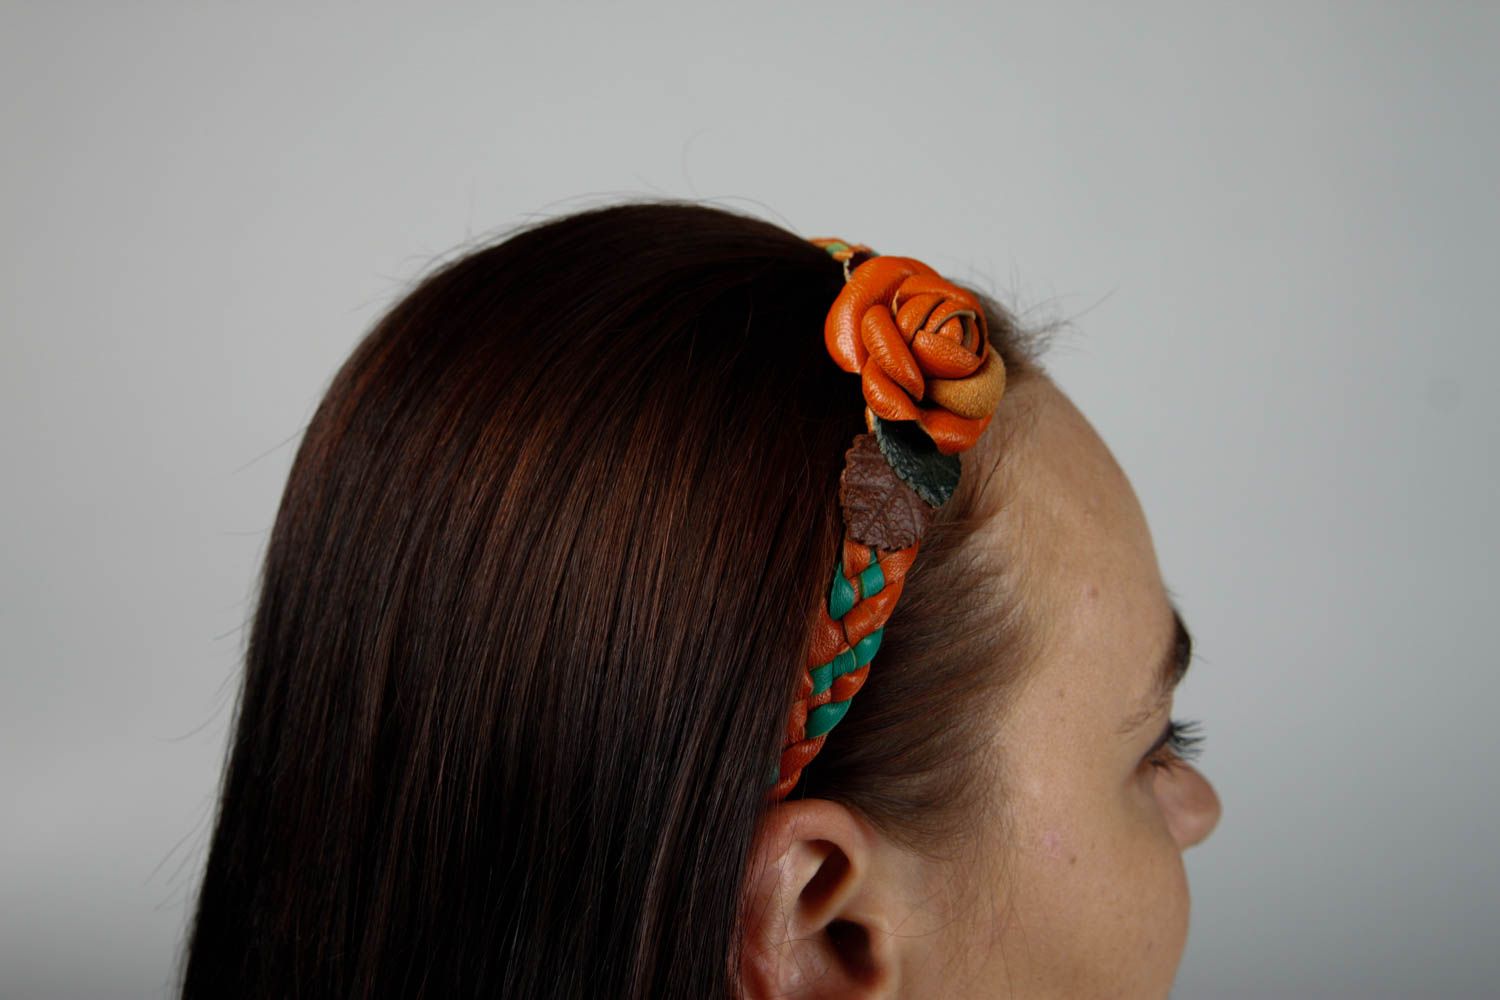 Handmade hair accessories for girls leather hair band flower jewelry gift ideas photo 2